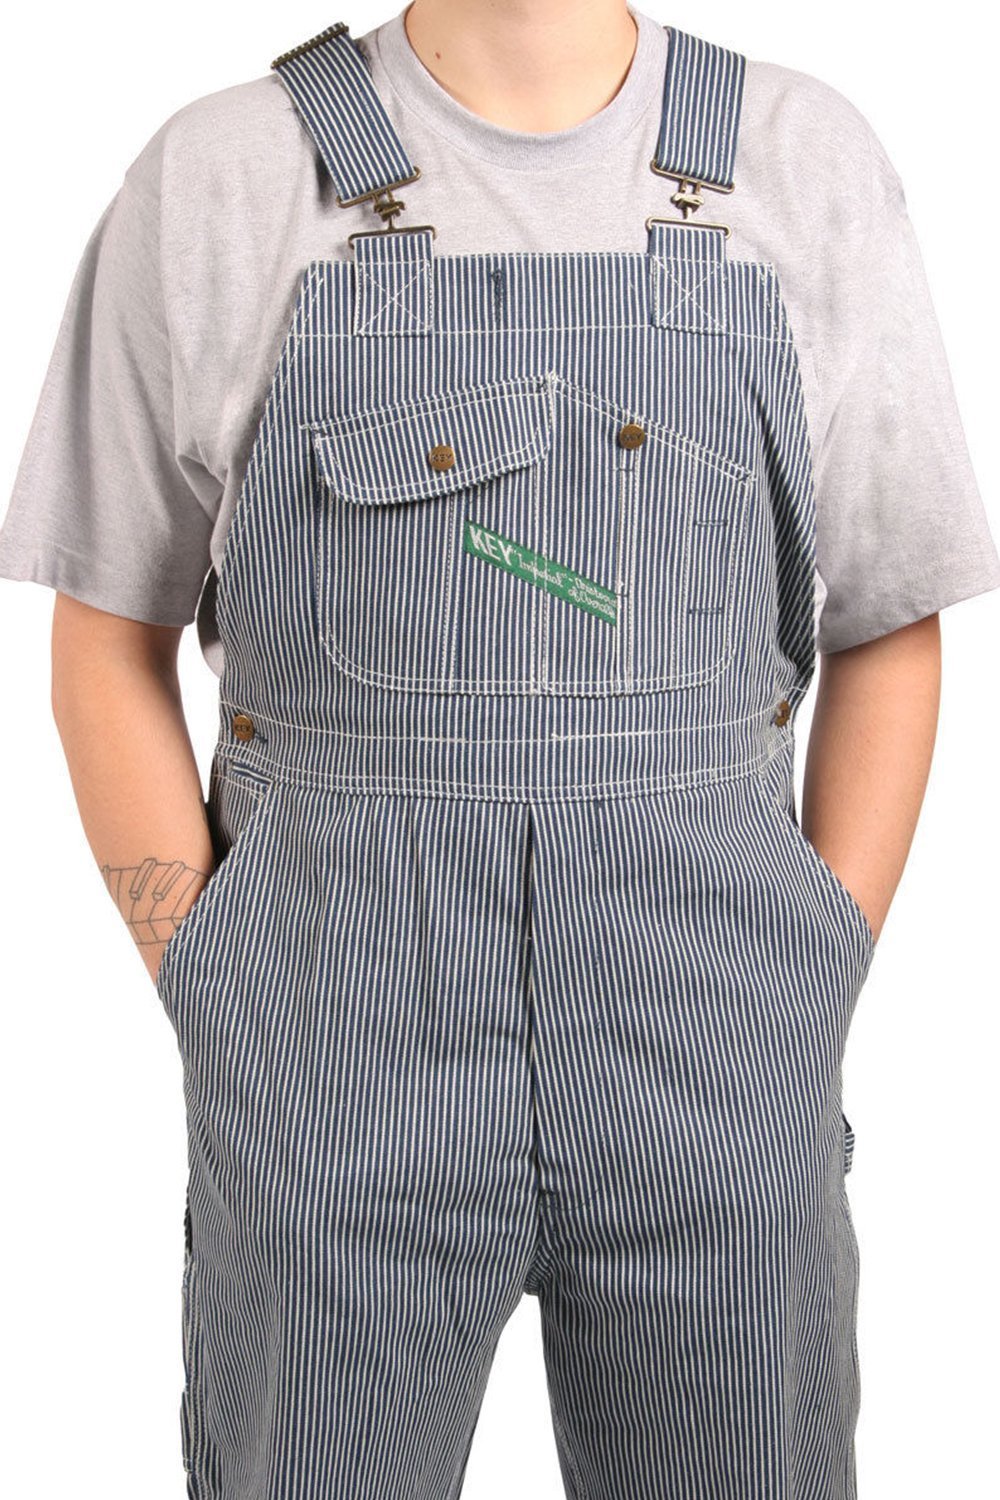 Close-up mid-section frontal of striped work bib-overall, showing multiple bib pockets, robust seams, zip fly and adjustable straps, with hands in front pockets.